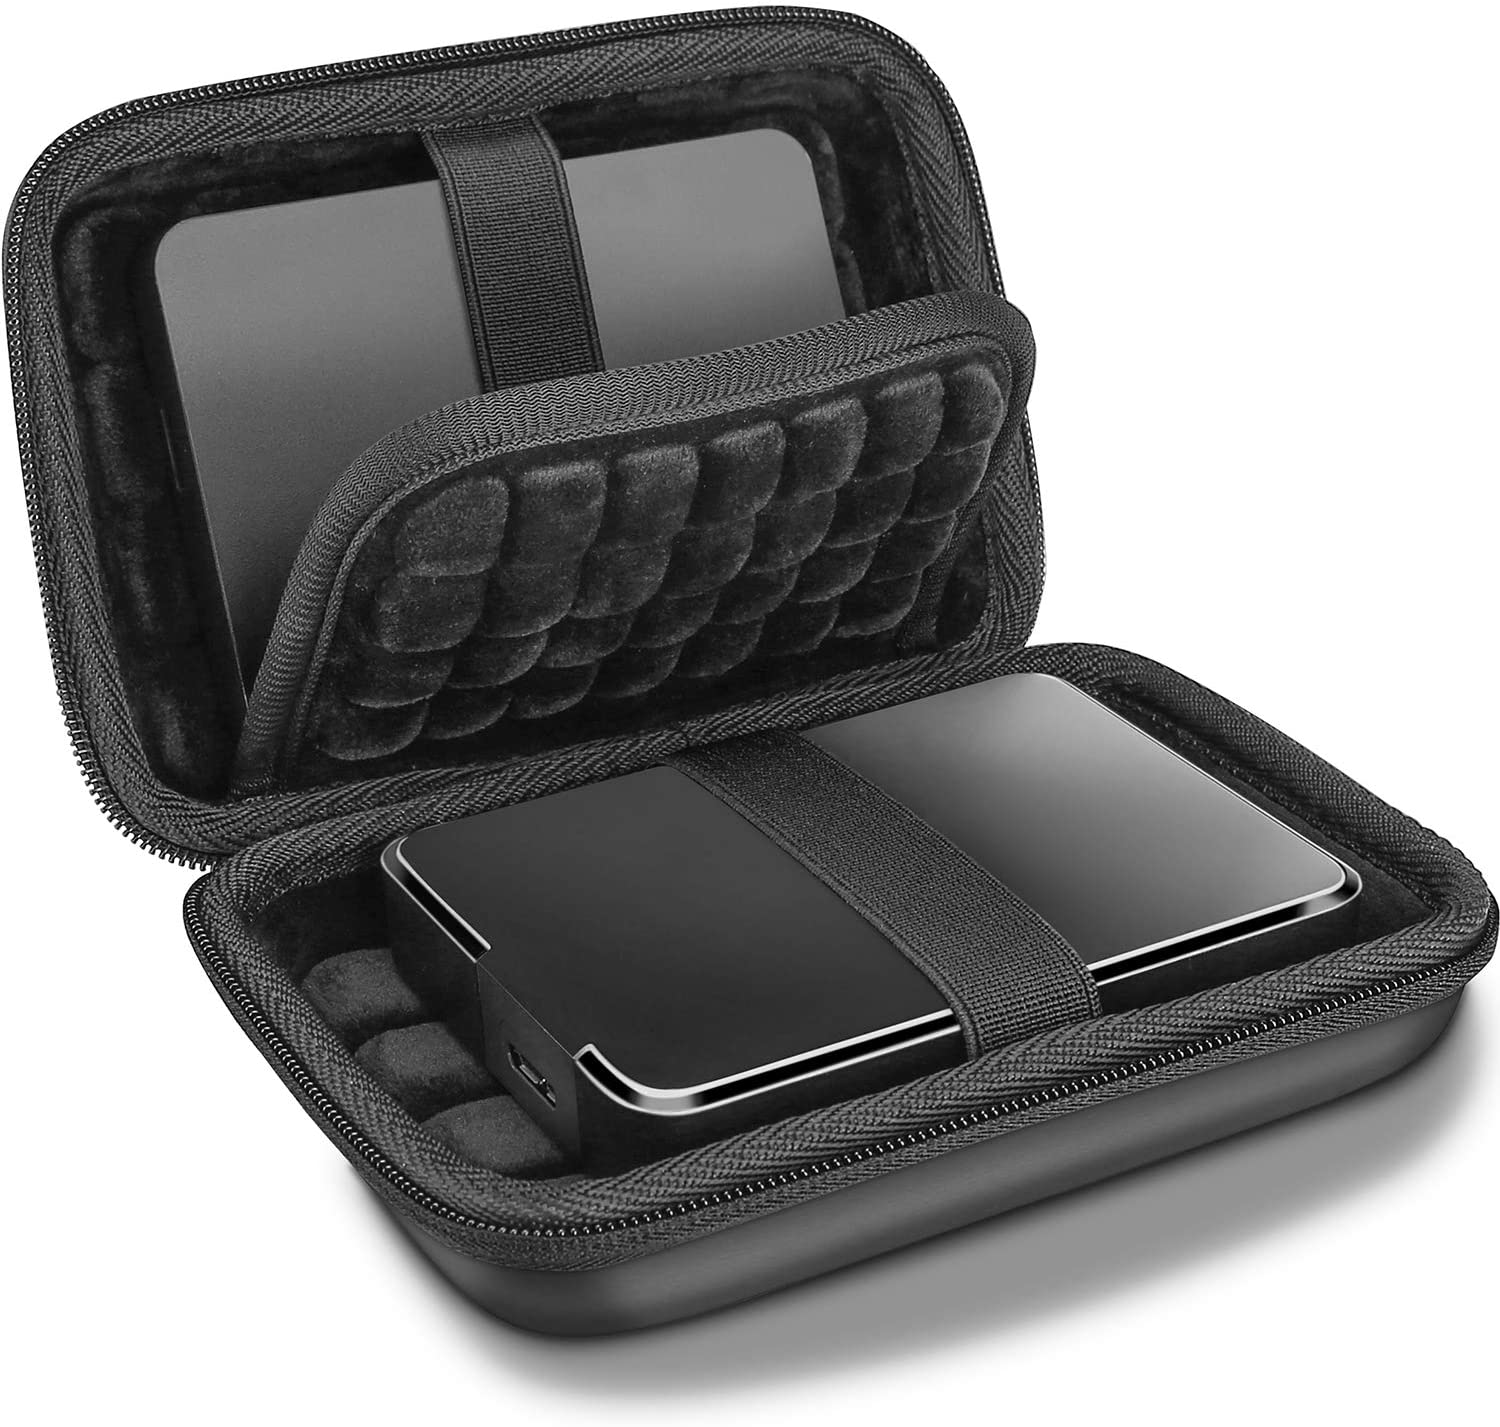 Hard Drive Carrying Case for Western Digital | ProCase